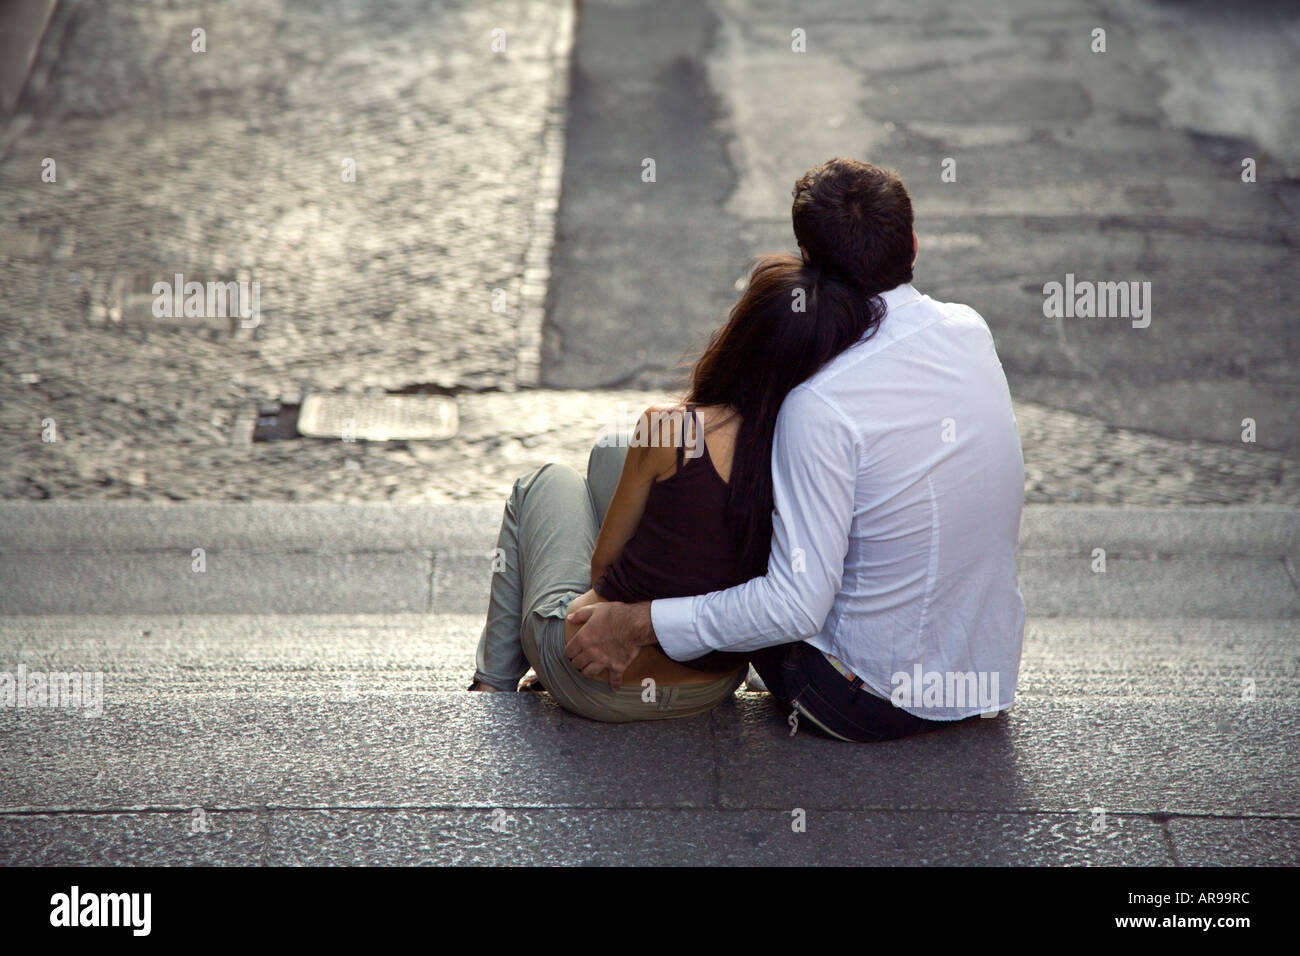 A young couple in love embrace on steps in Rome Stock Photo